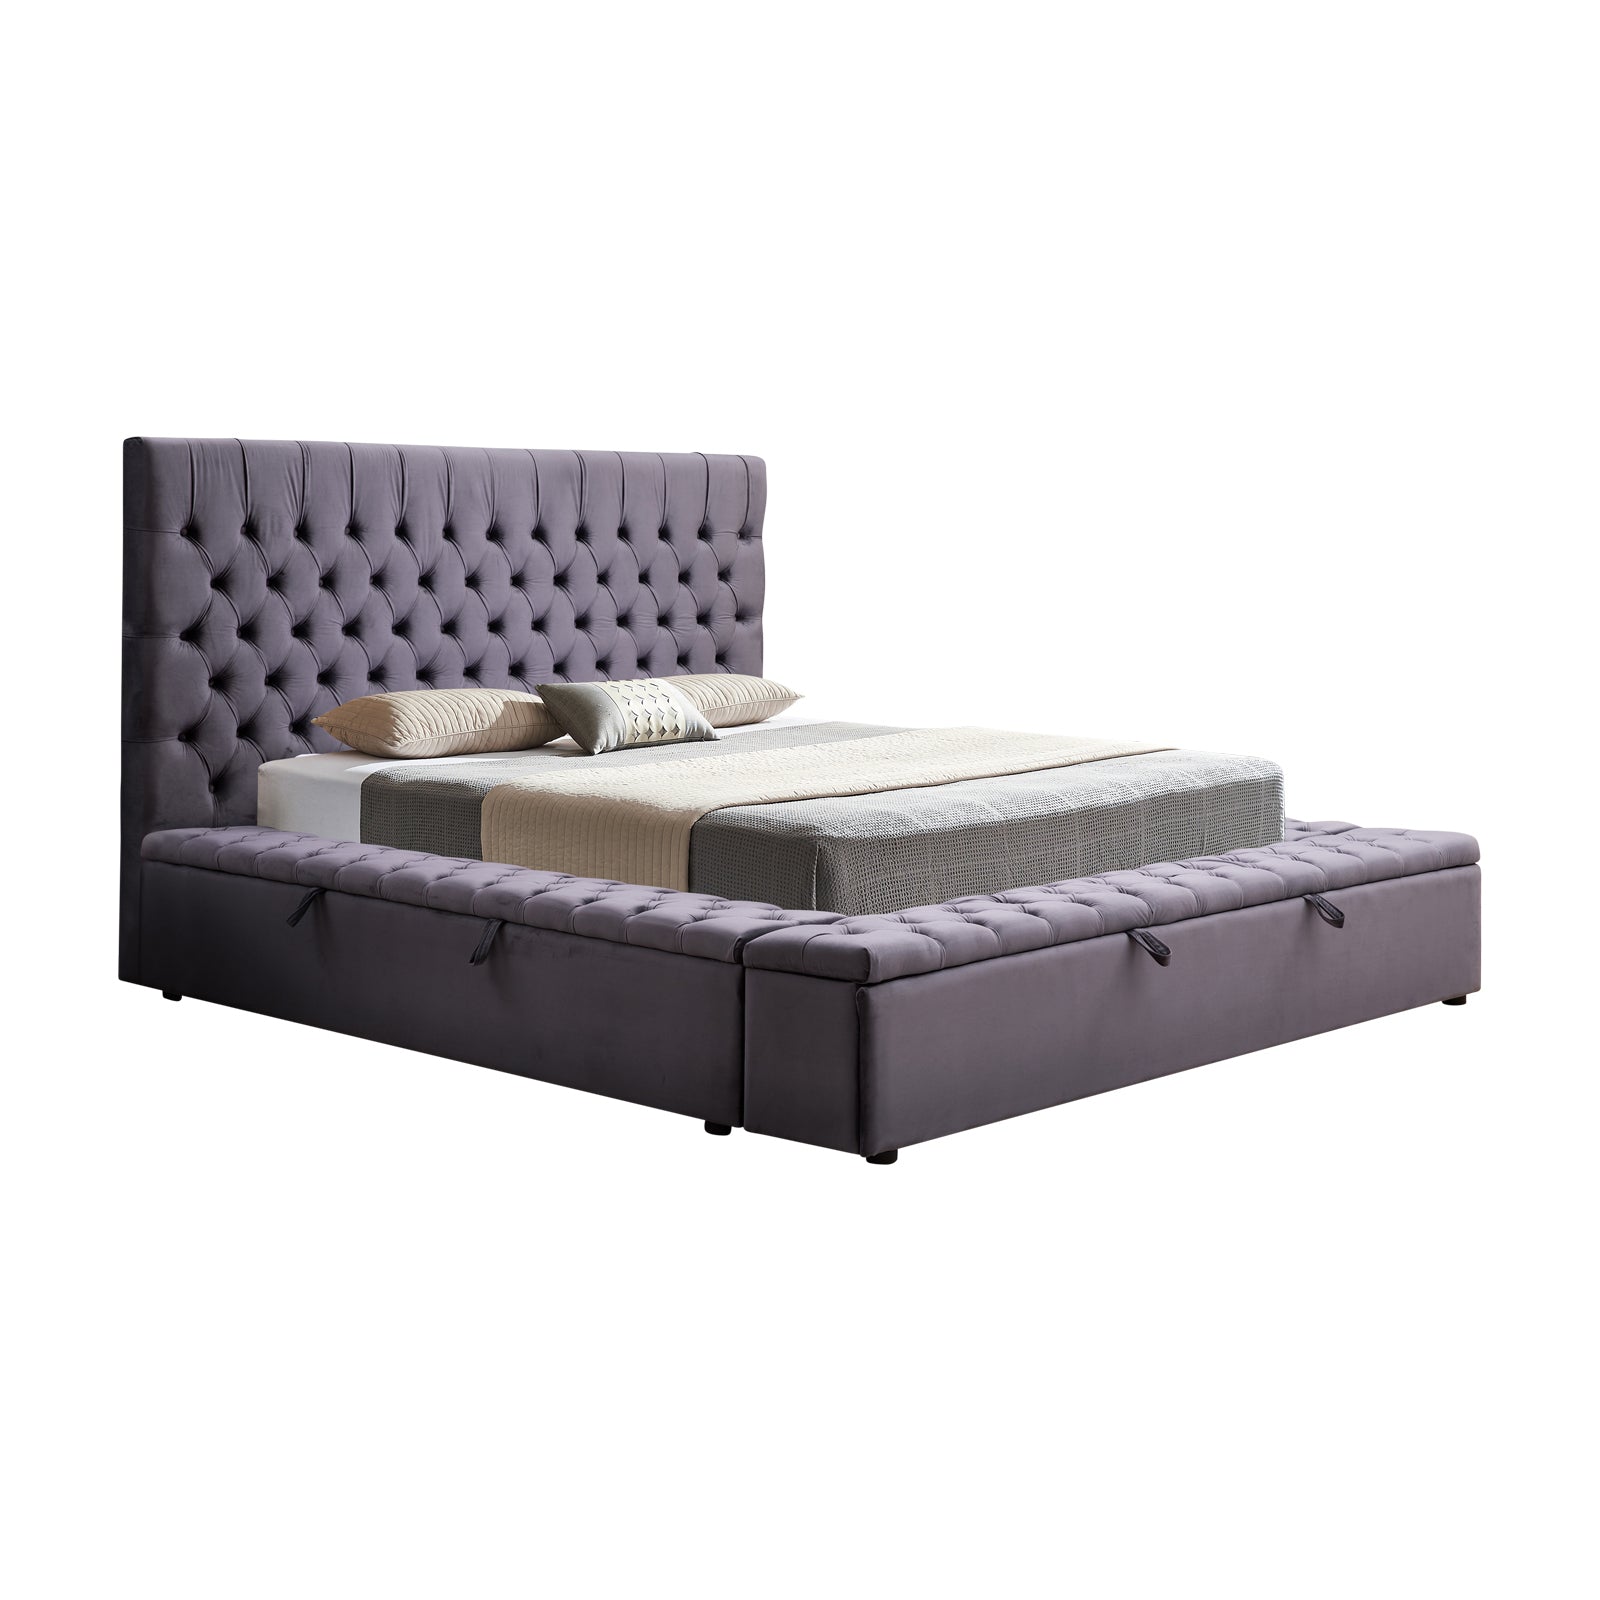 Queen Size Bed Frame With Velvet Upholstery and Tufted Headboard with Deep Quilting